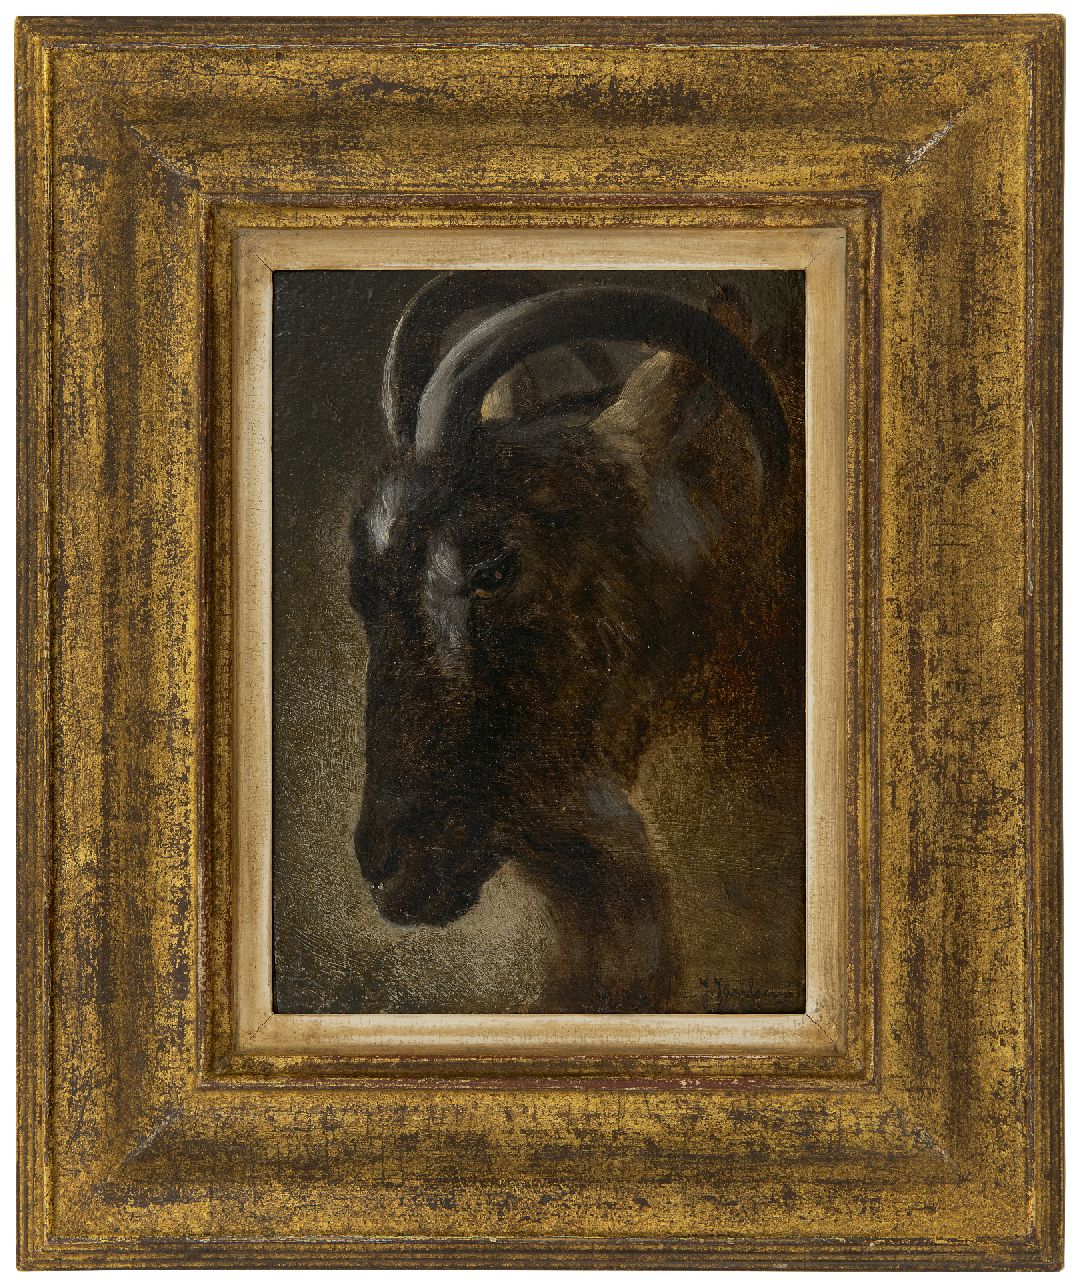 Janssens J.  | Jacques Janssens | Paintings offered for sale | Head of a ram, oil on panel 22.2 x 16.2 cm, signed l.r.